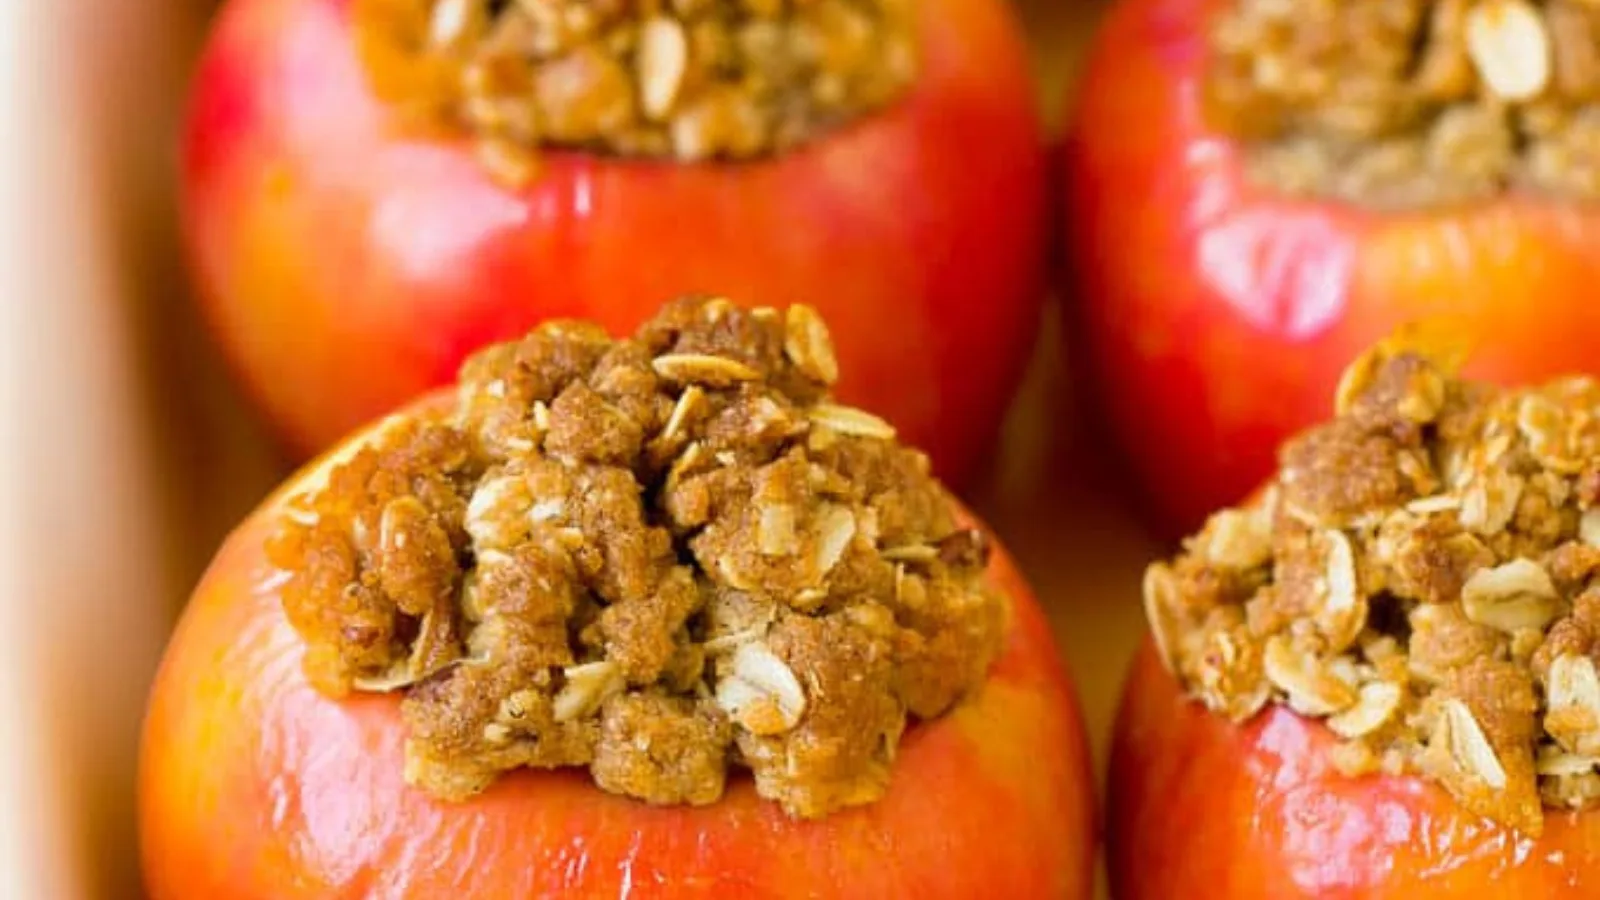 Baked apples filled with oatmeal.